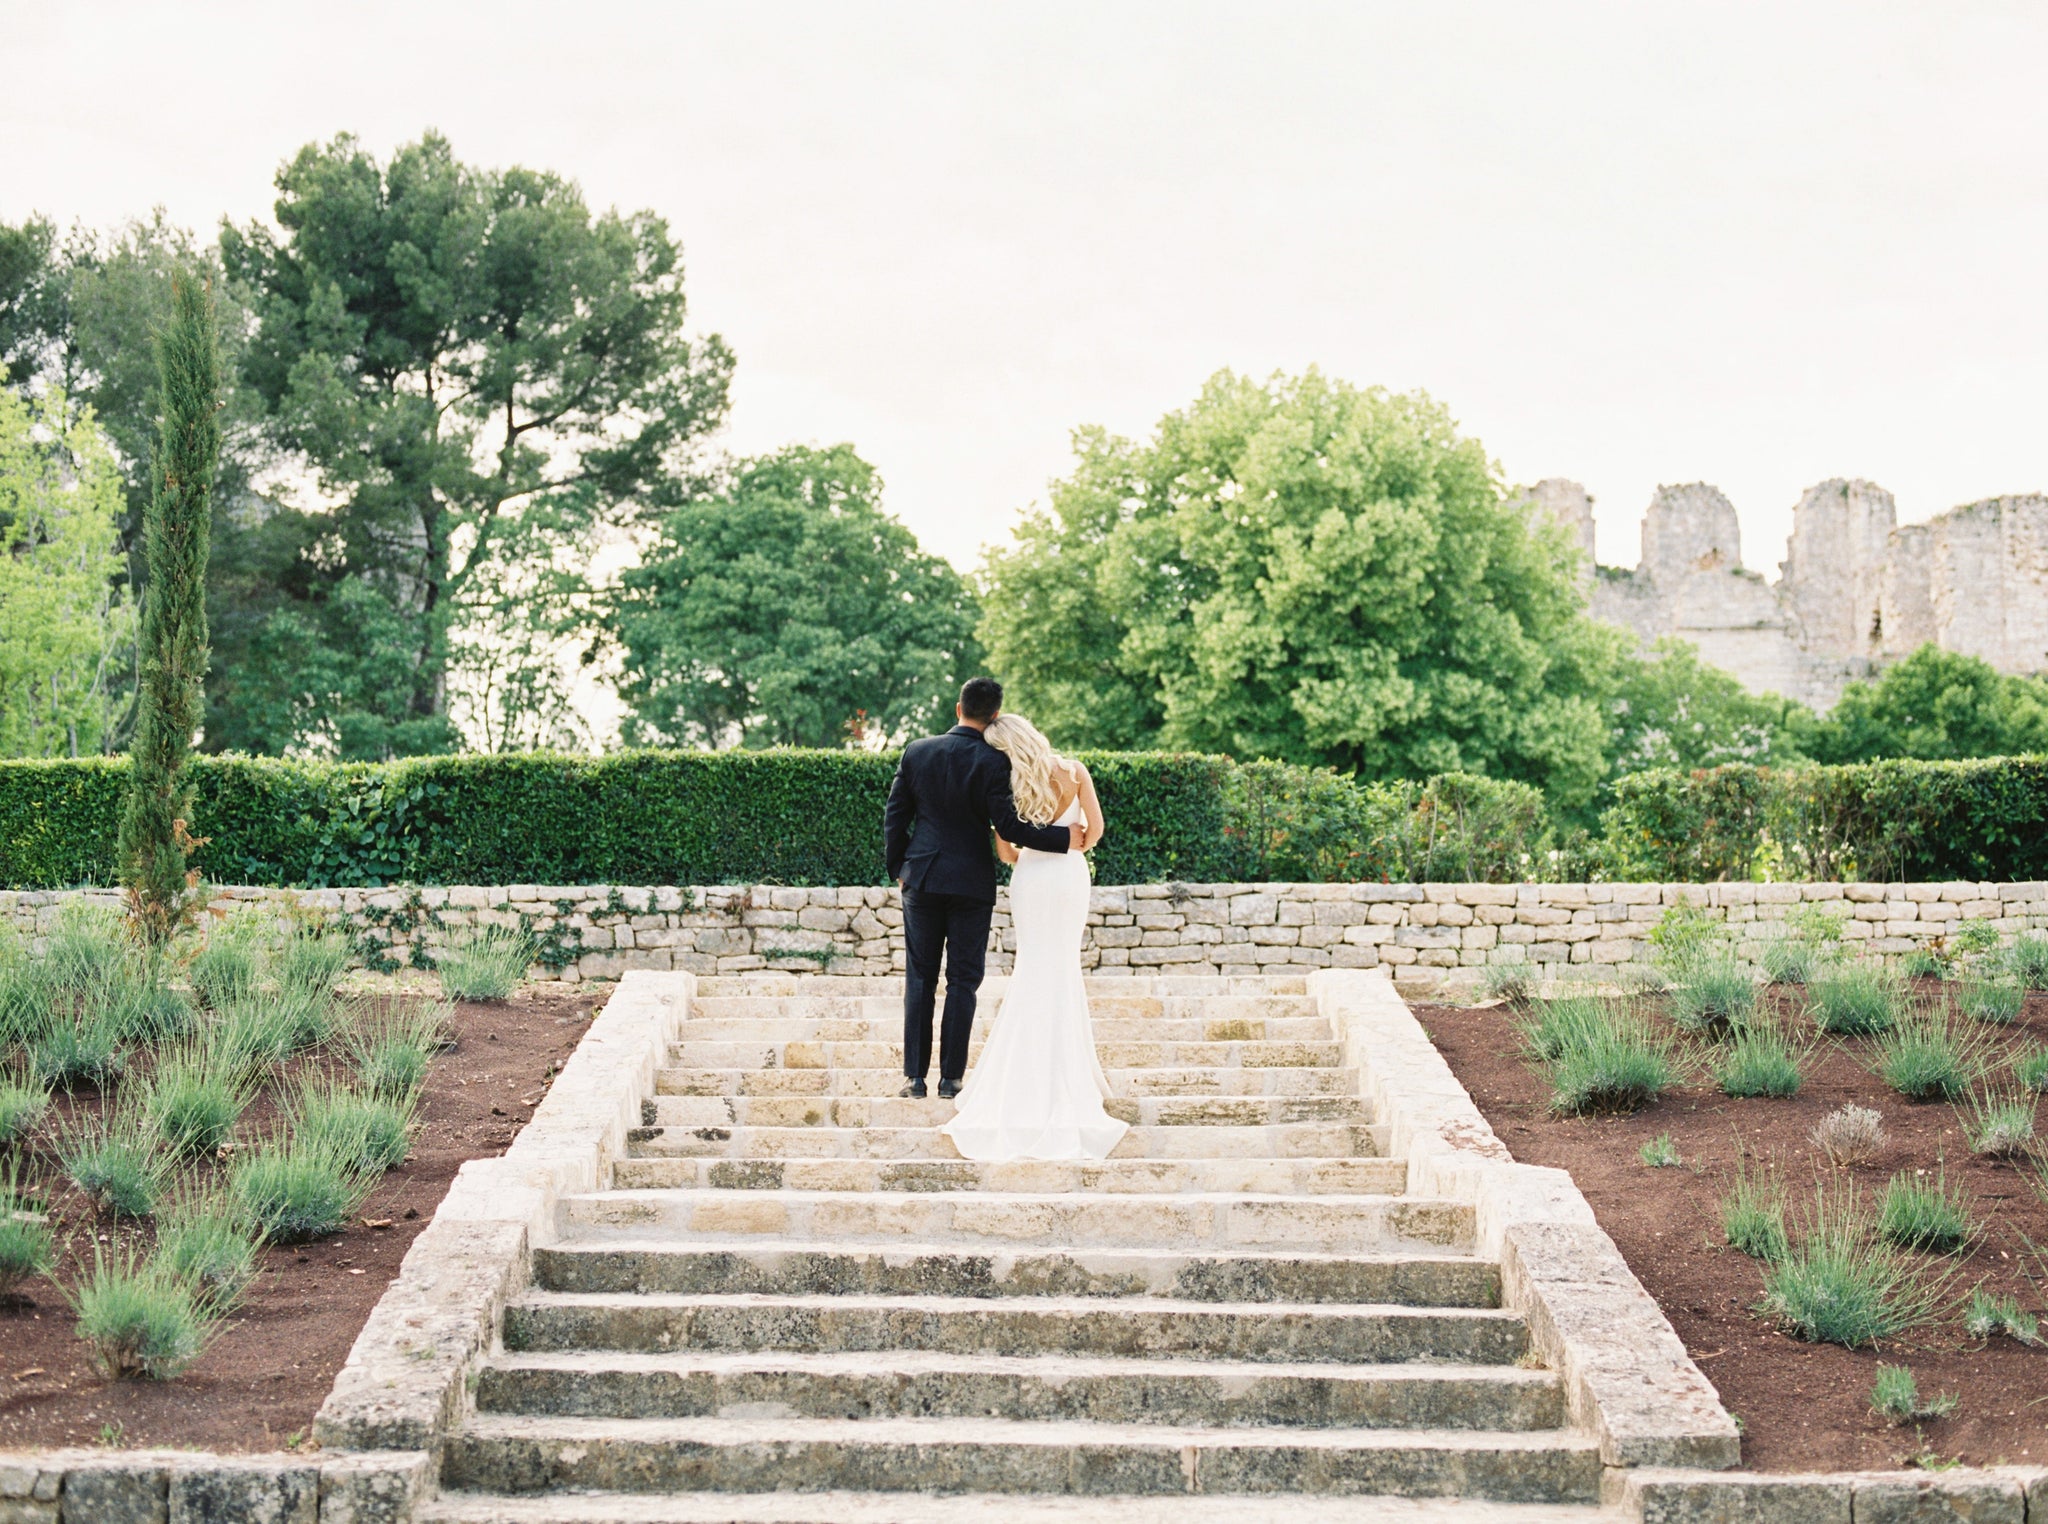 Katie Dean Jewelry romantic destination wedding at a chateau, Provence, France, bride and groom portrait